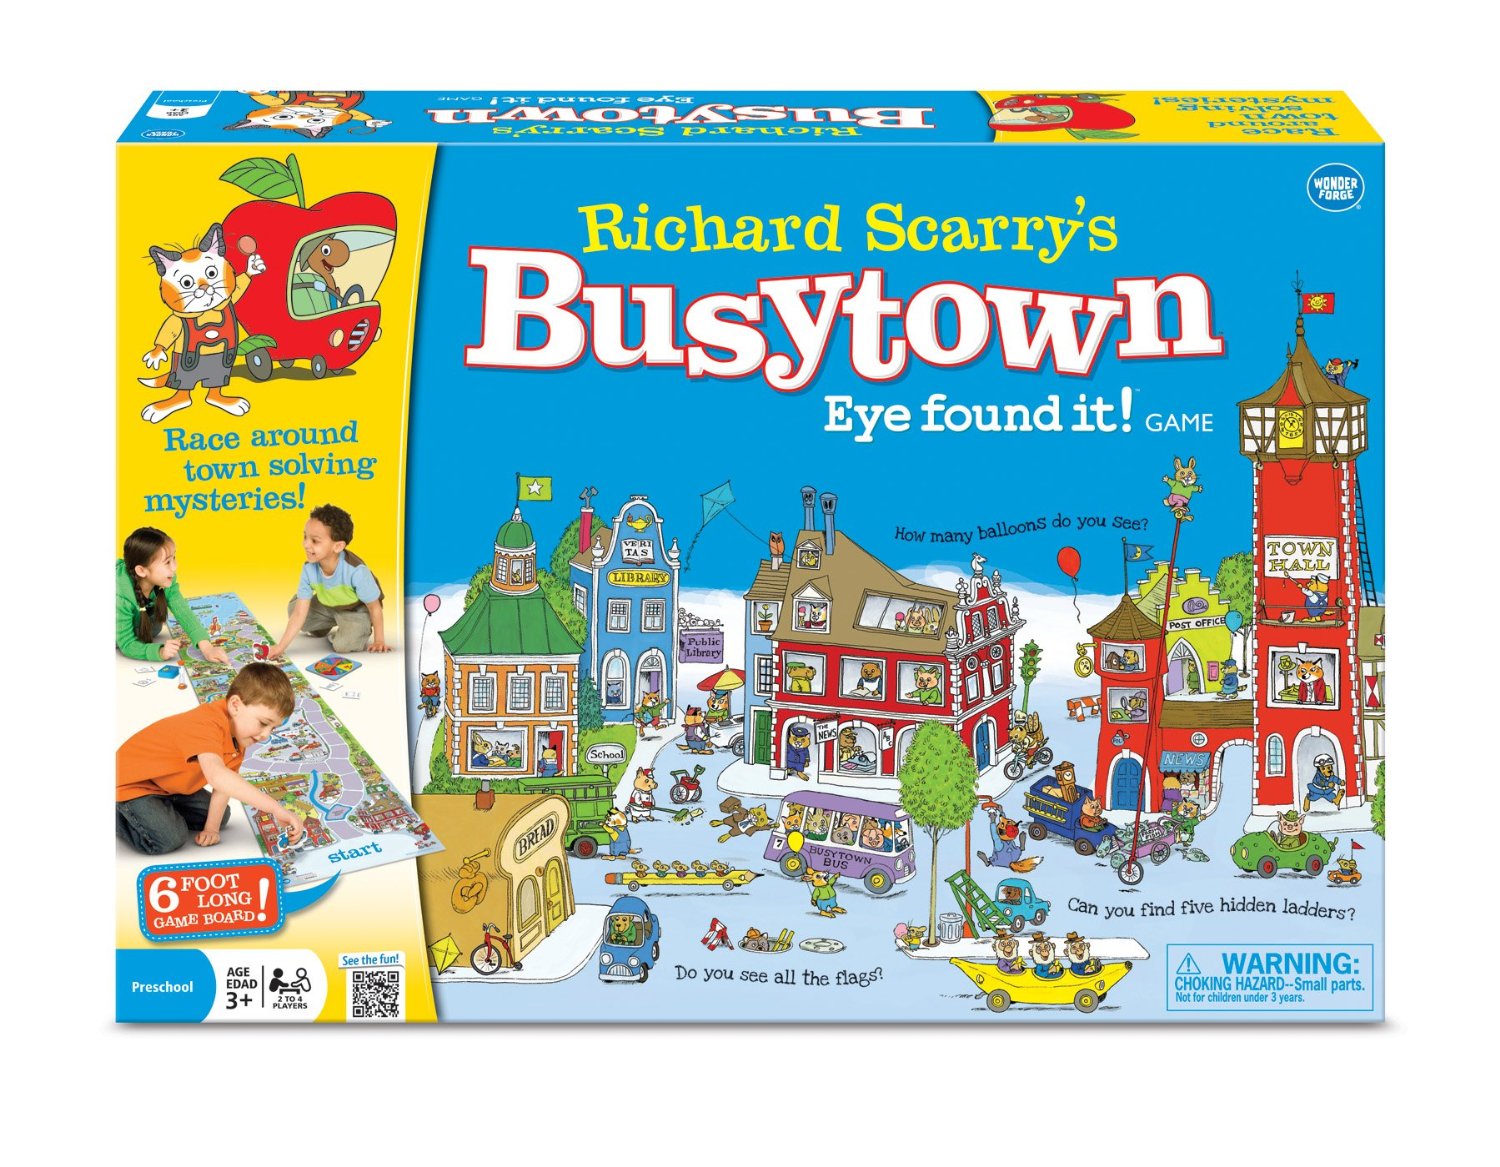 Around the town board game- online learning